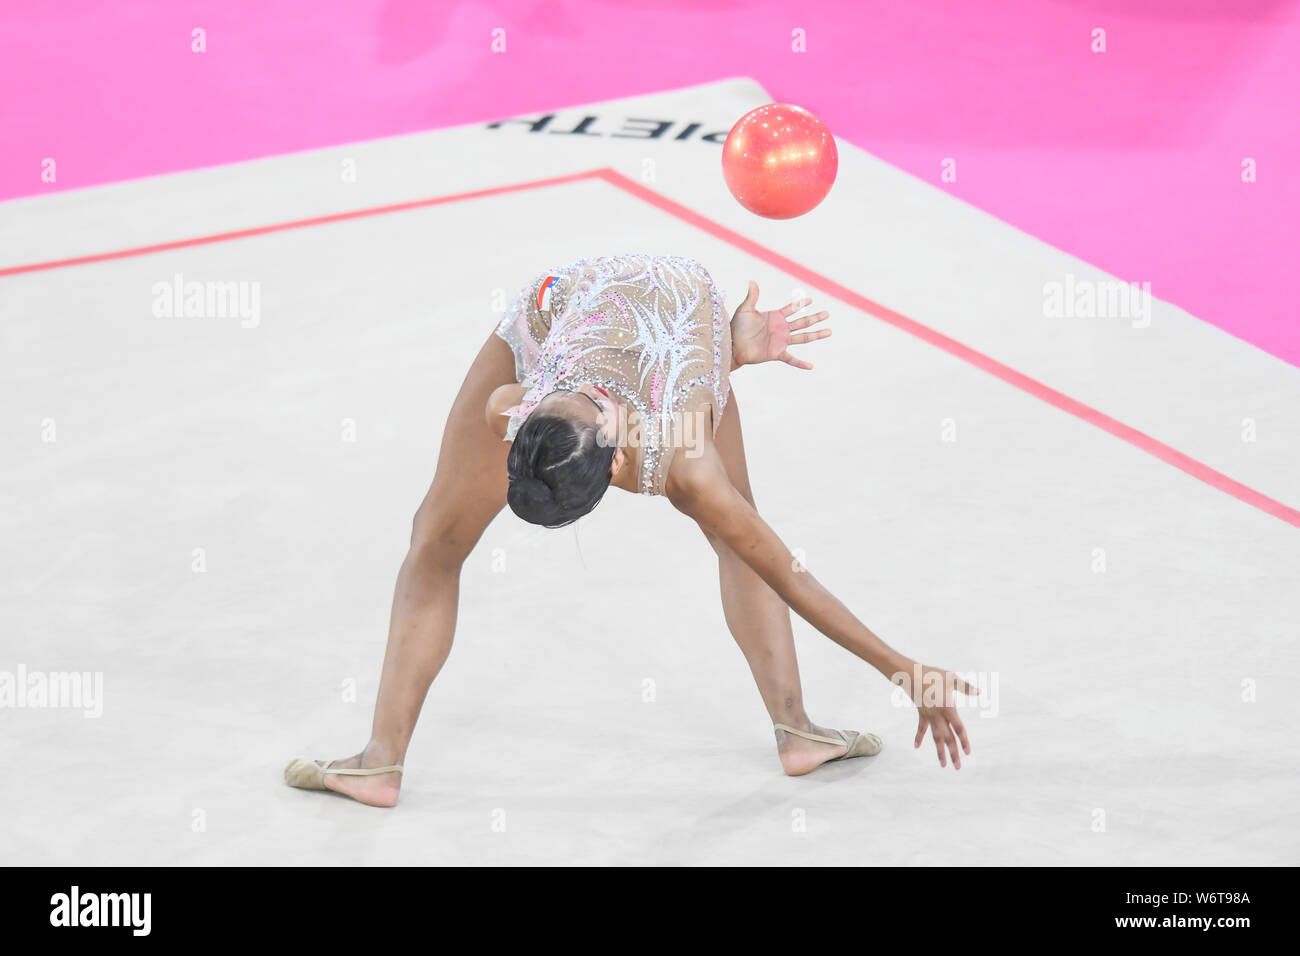 Lima, Peru. 2nd Aug, 2019. JAVIERA RUBILAR from Chile competes in the individual All-Around with the ball during the competition held in the Polideportivo Villa El Salvador in Lima, Peru. Credit: Amy Sanderson/ZUMA Wire/Alamy Live News Stock Photo